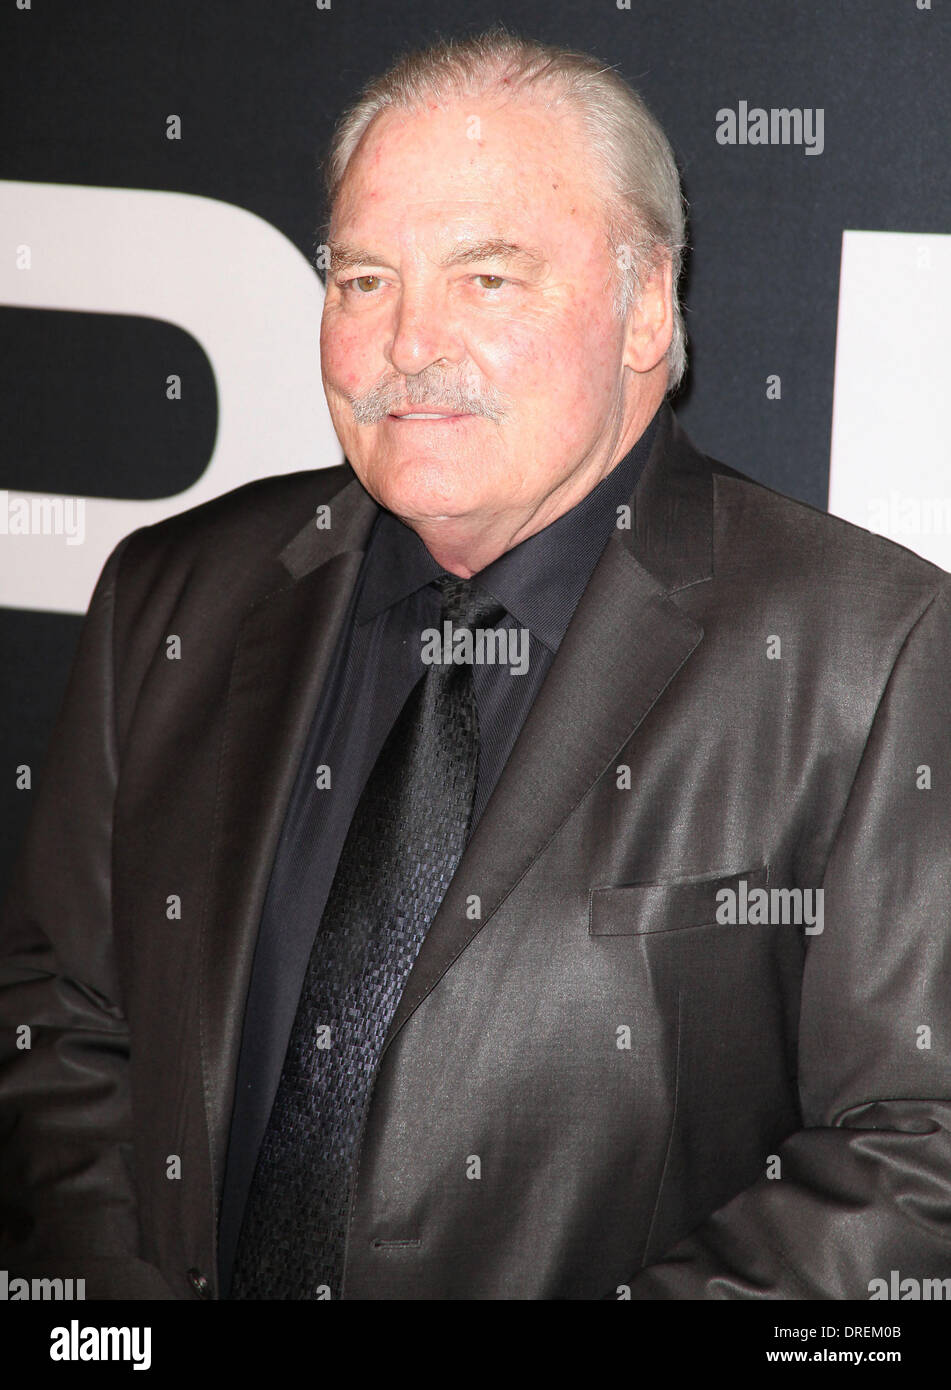 Stacy Keach,  at the Universal Pictures world premiere of 'The Bourne Legacy' at the Ziegfeld Theatre - Arrivals New York City, USA - 30.07.12 Stock Photo